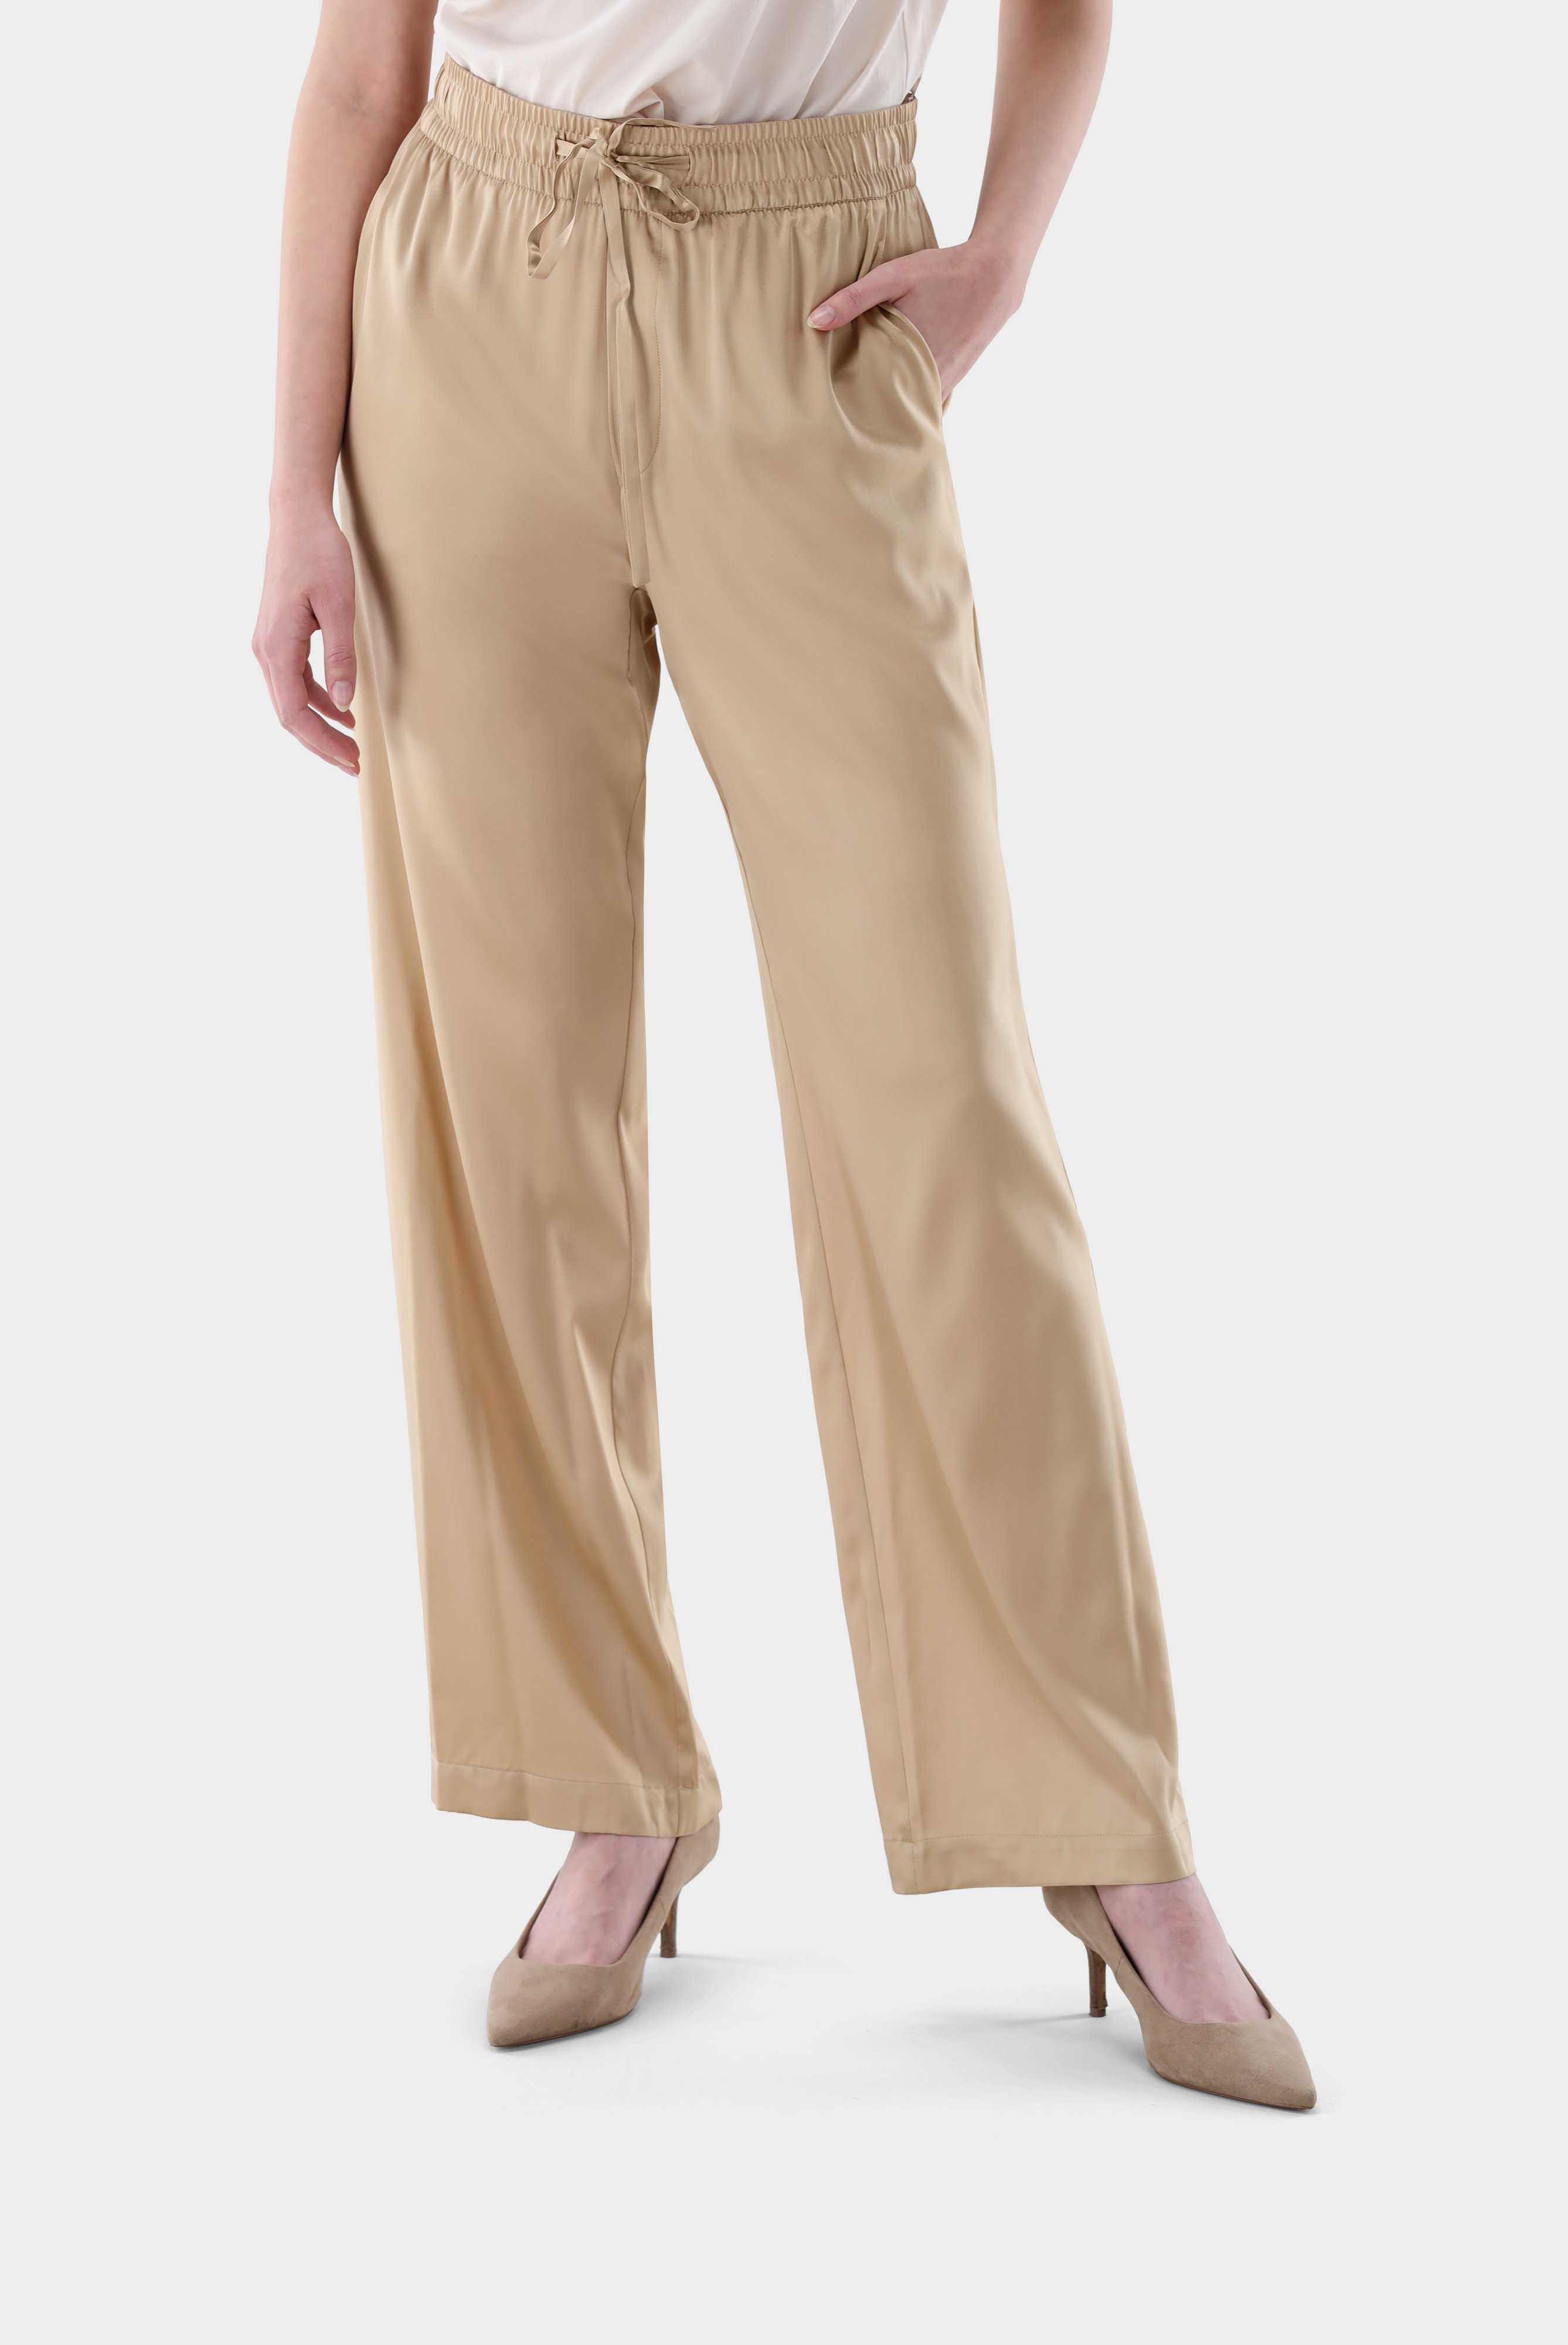 Jeans & Trousers+Palazzo trousers in silk satin stretch+05.6743..155152.250.34